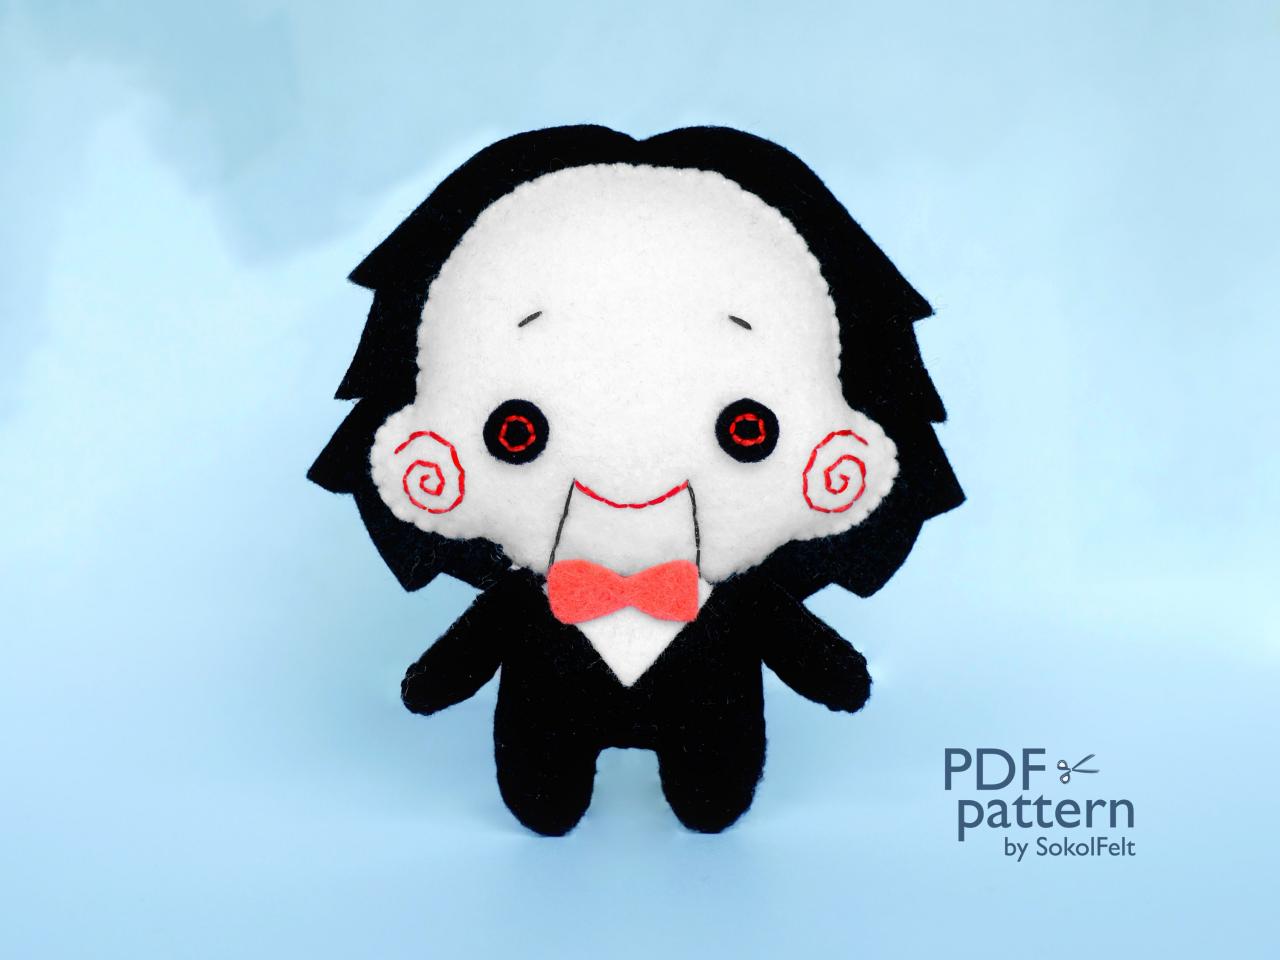 Billy The Puppet Doll Felt Toy Pdf And Svg Patterns, Horror Movie Character, Easy To Make Plush Toy For Halloween